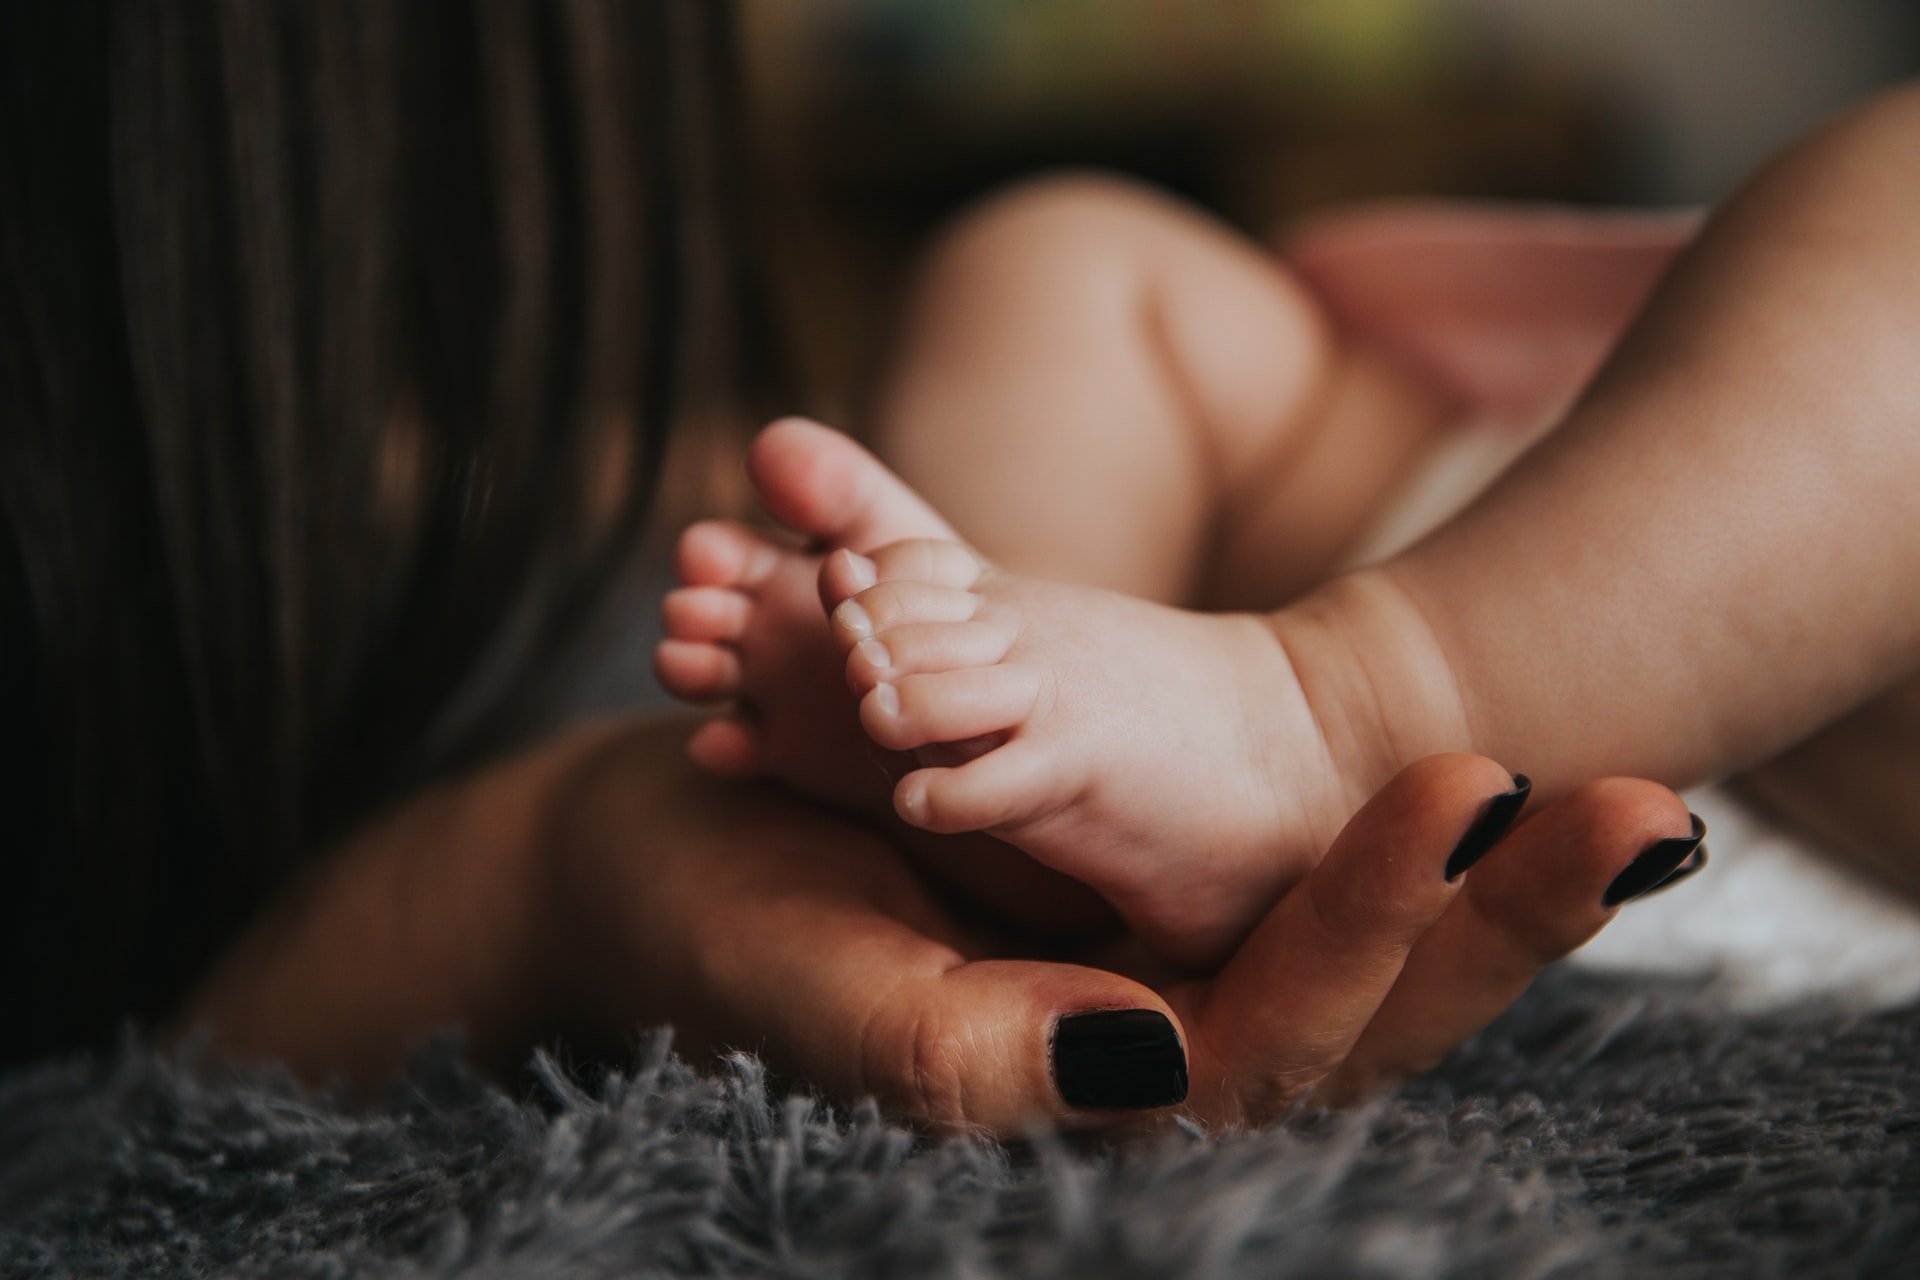 His wife wanted to do a paternity test on their daughter. | Source: Unsplash